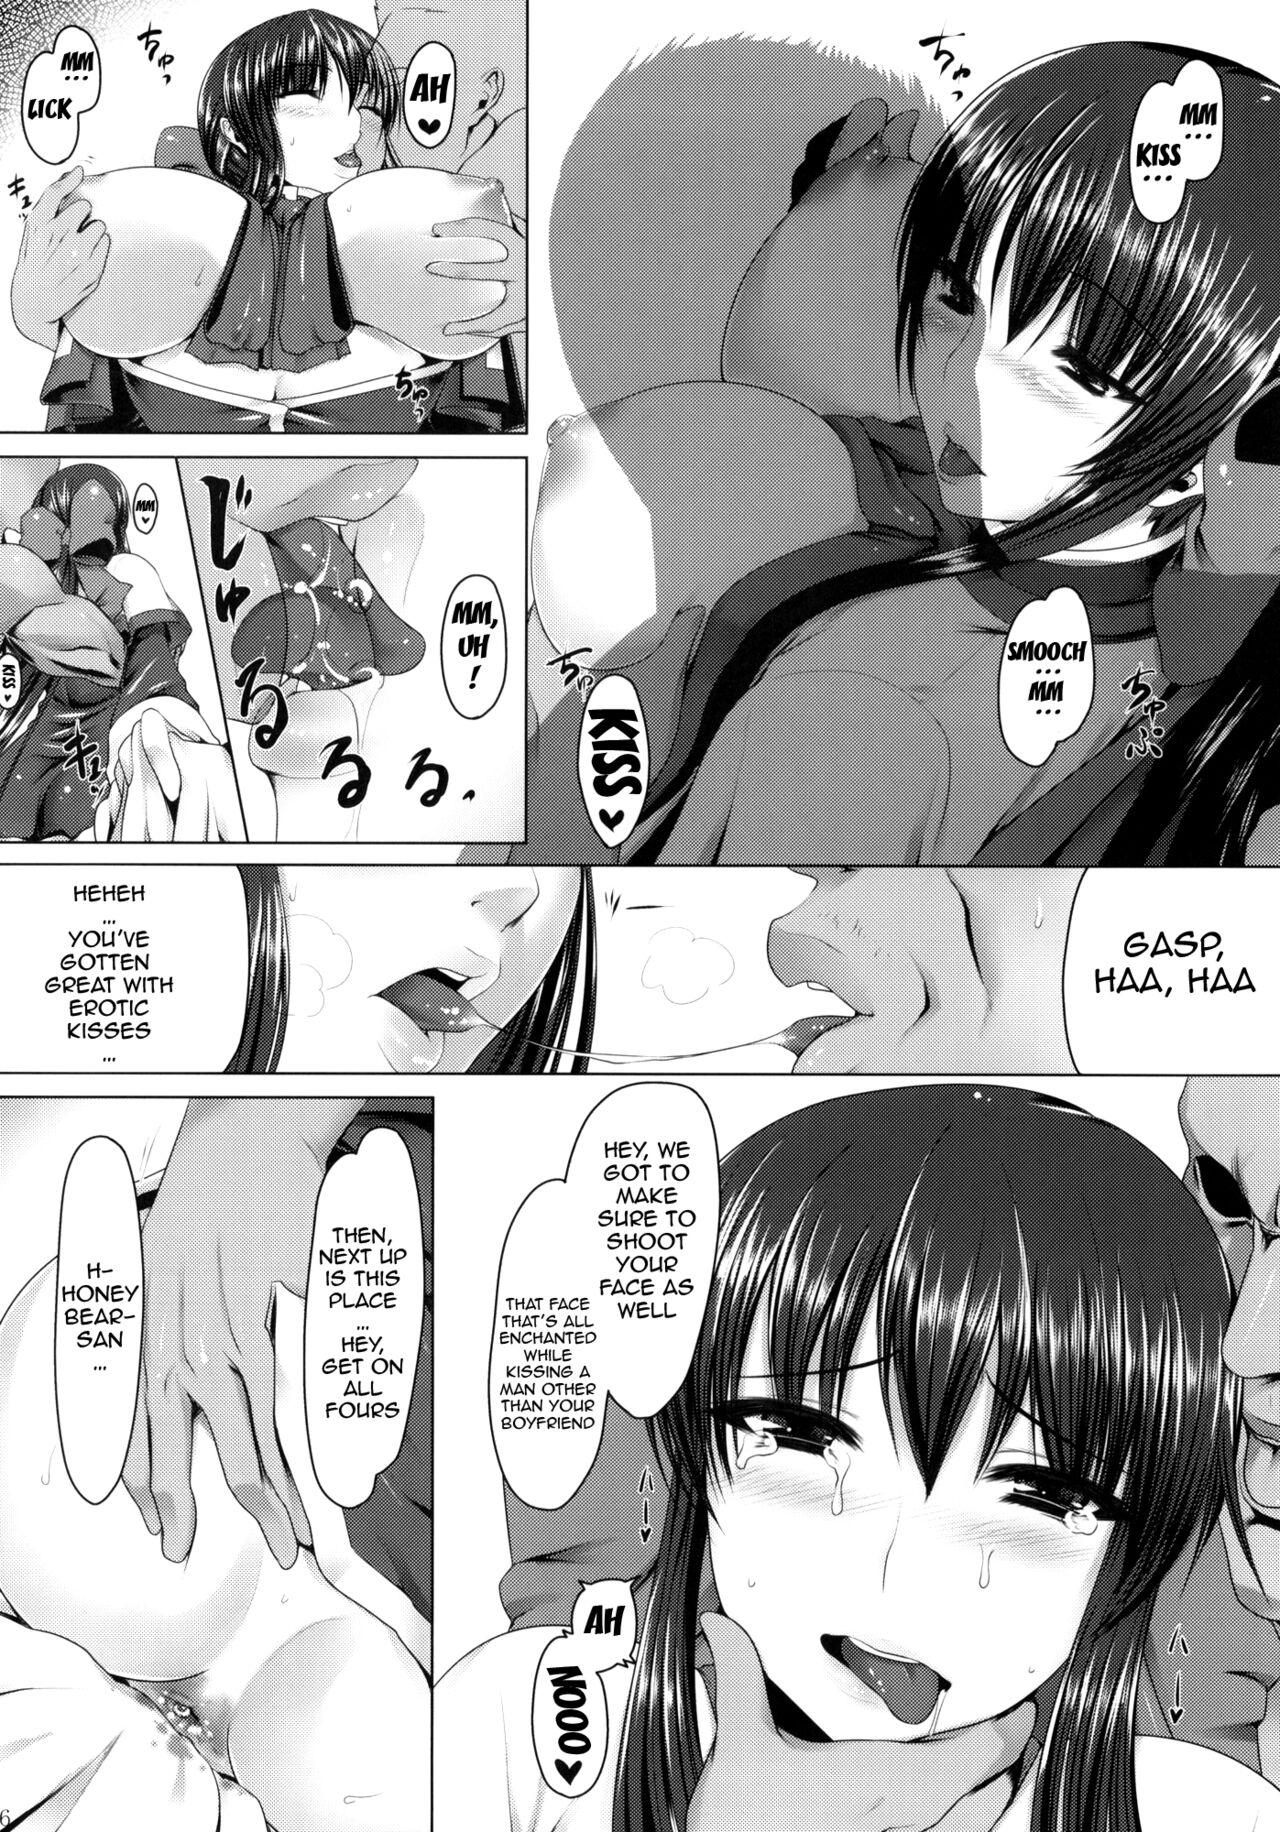 Speculum Anal Mai Yon - Kanon Parties - Page 5